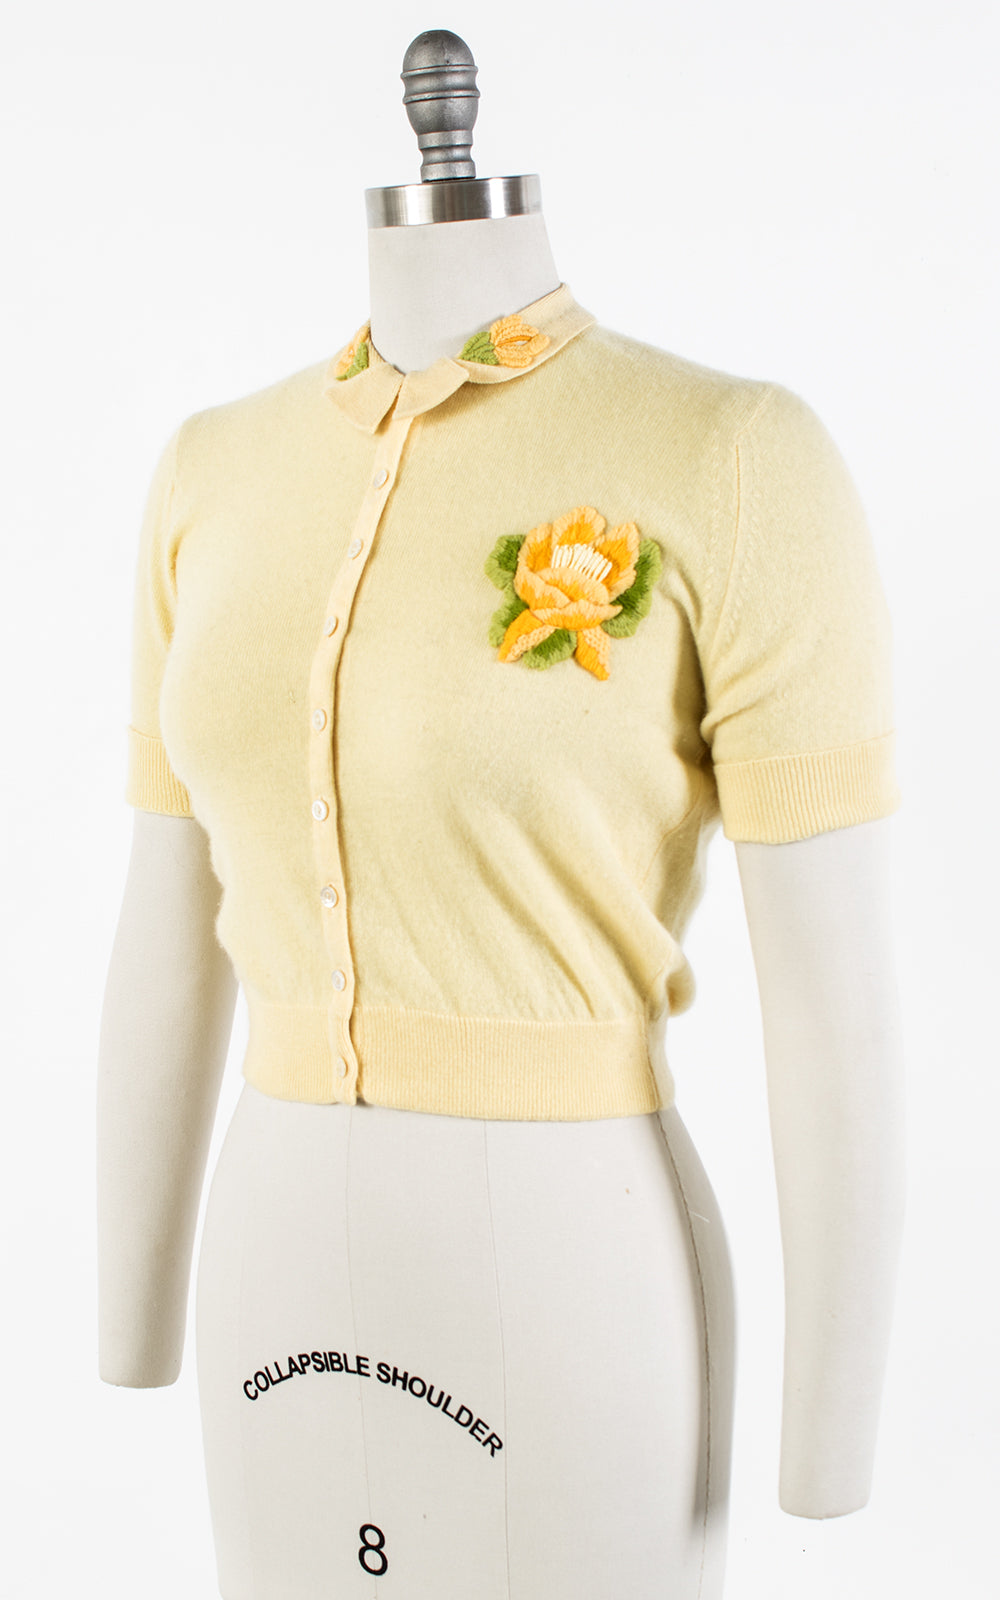 1950s Floral Appliqué Cashmere Knit Yellow Cardigan Top | x-small/small/medium